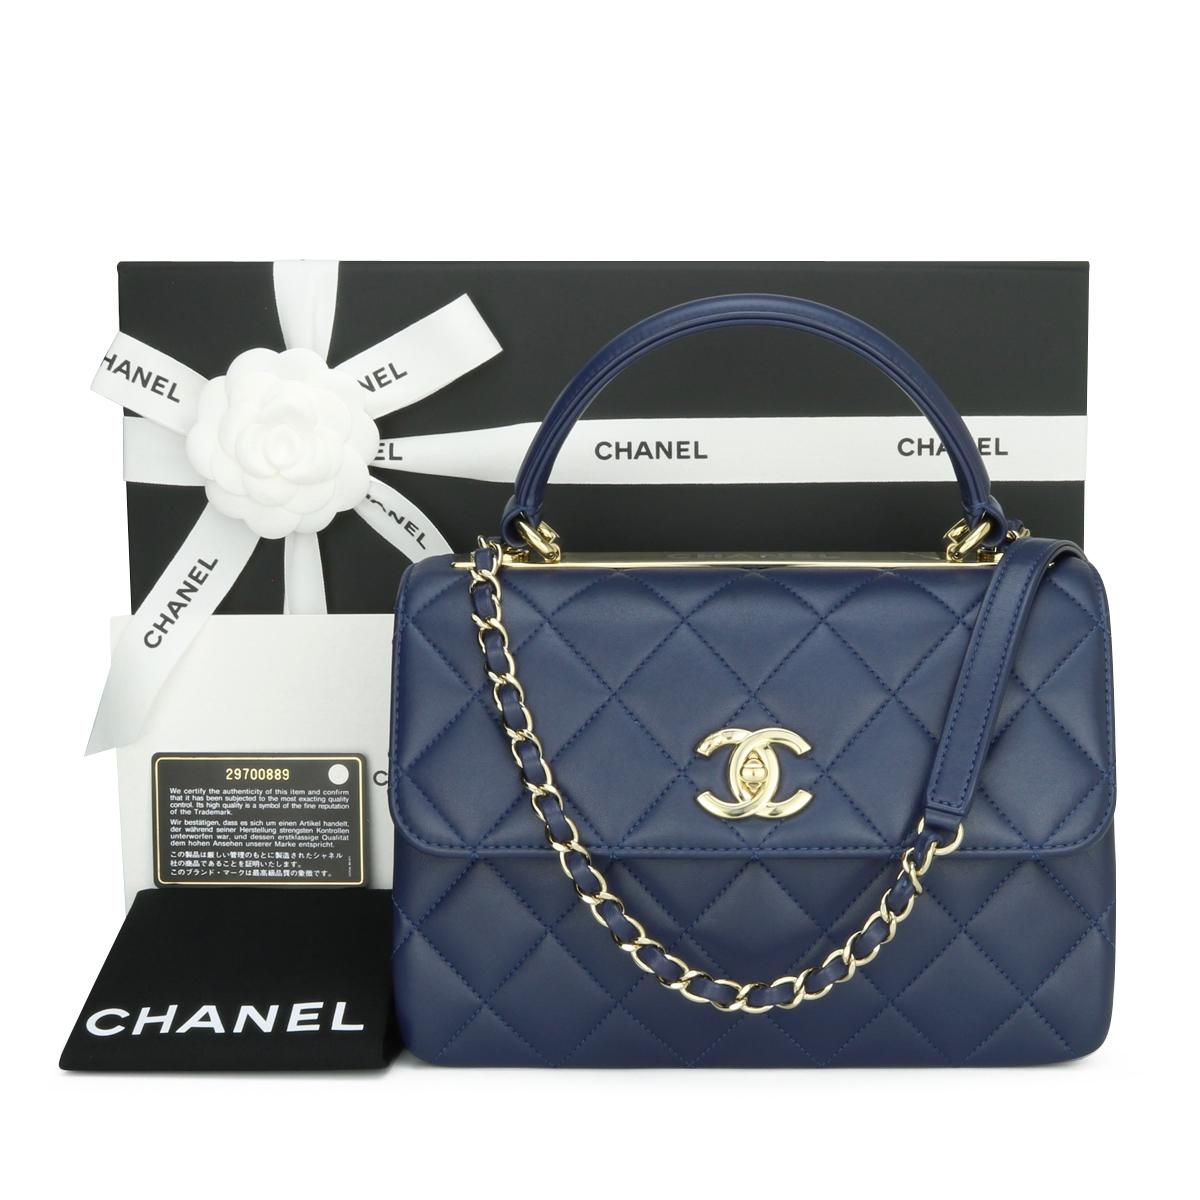 CHANEL Trendy CC Top Handle Bag Small Navy Blue Lambskin with Light Gold Hardware 2020.

This stunning bag is in excellent condition, the bag still holds its original shape, and the hardware is still very shiny.

This top handle bag is simply